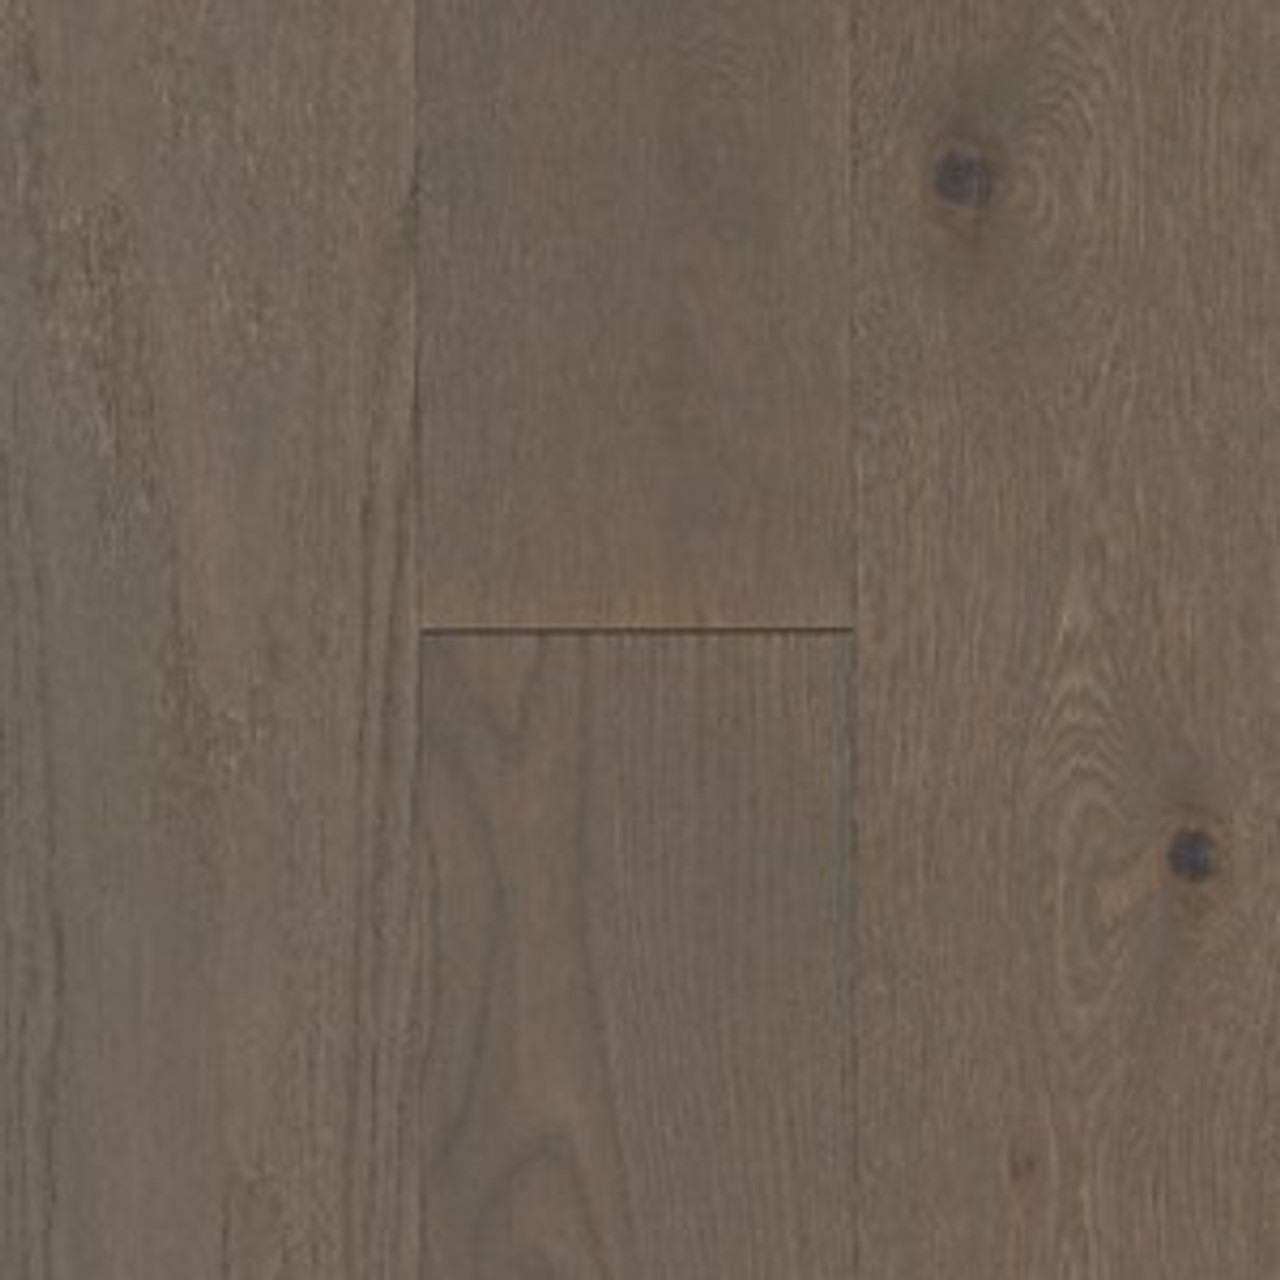 Buy Mohawk Weathered Vintage 7 Hardwood For An Affordable Price